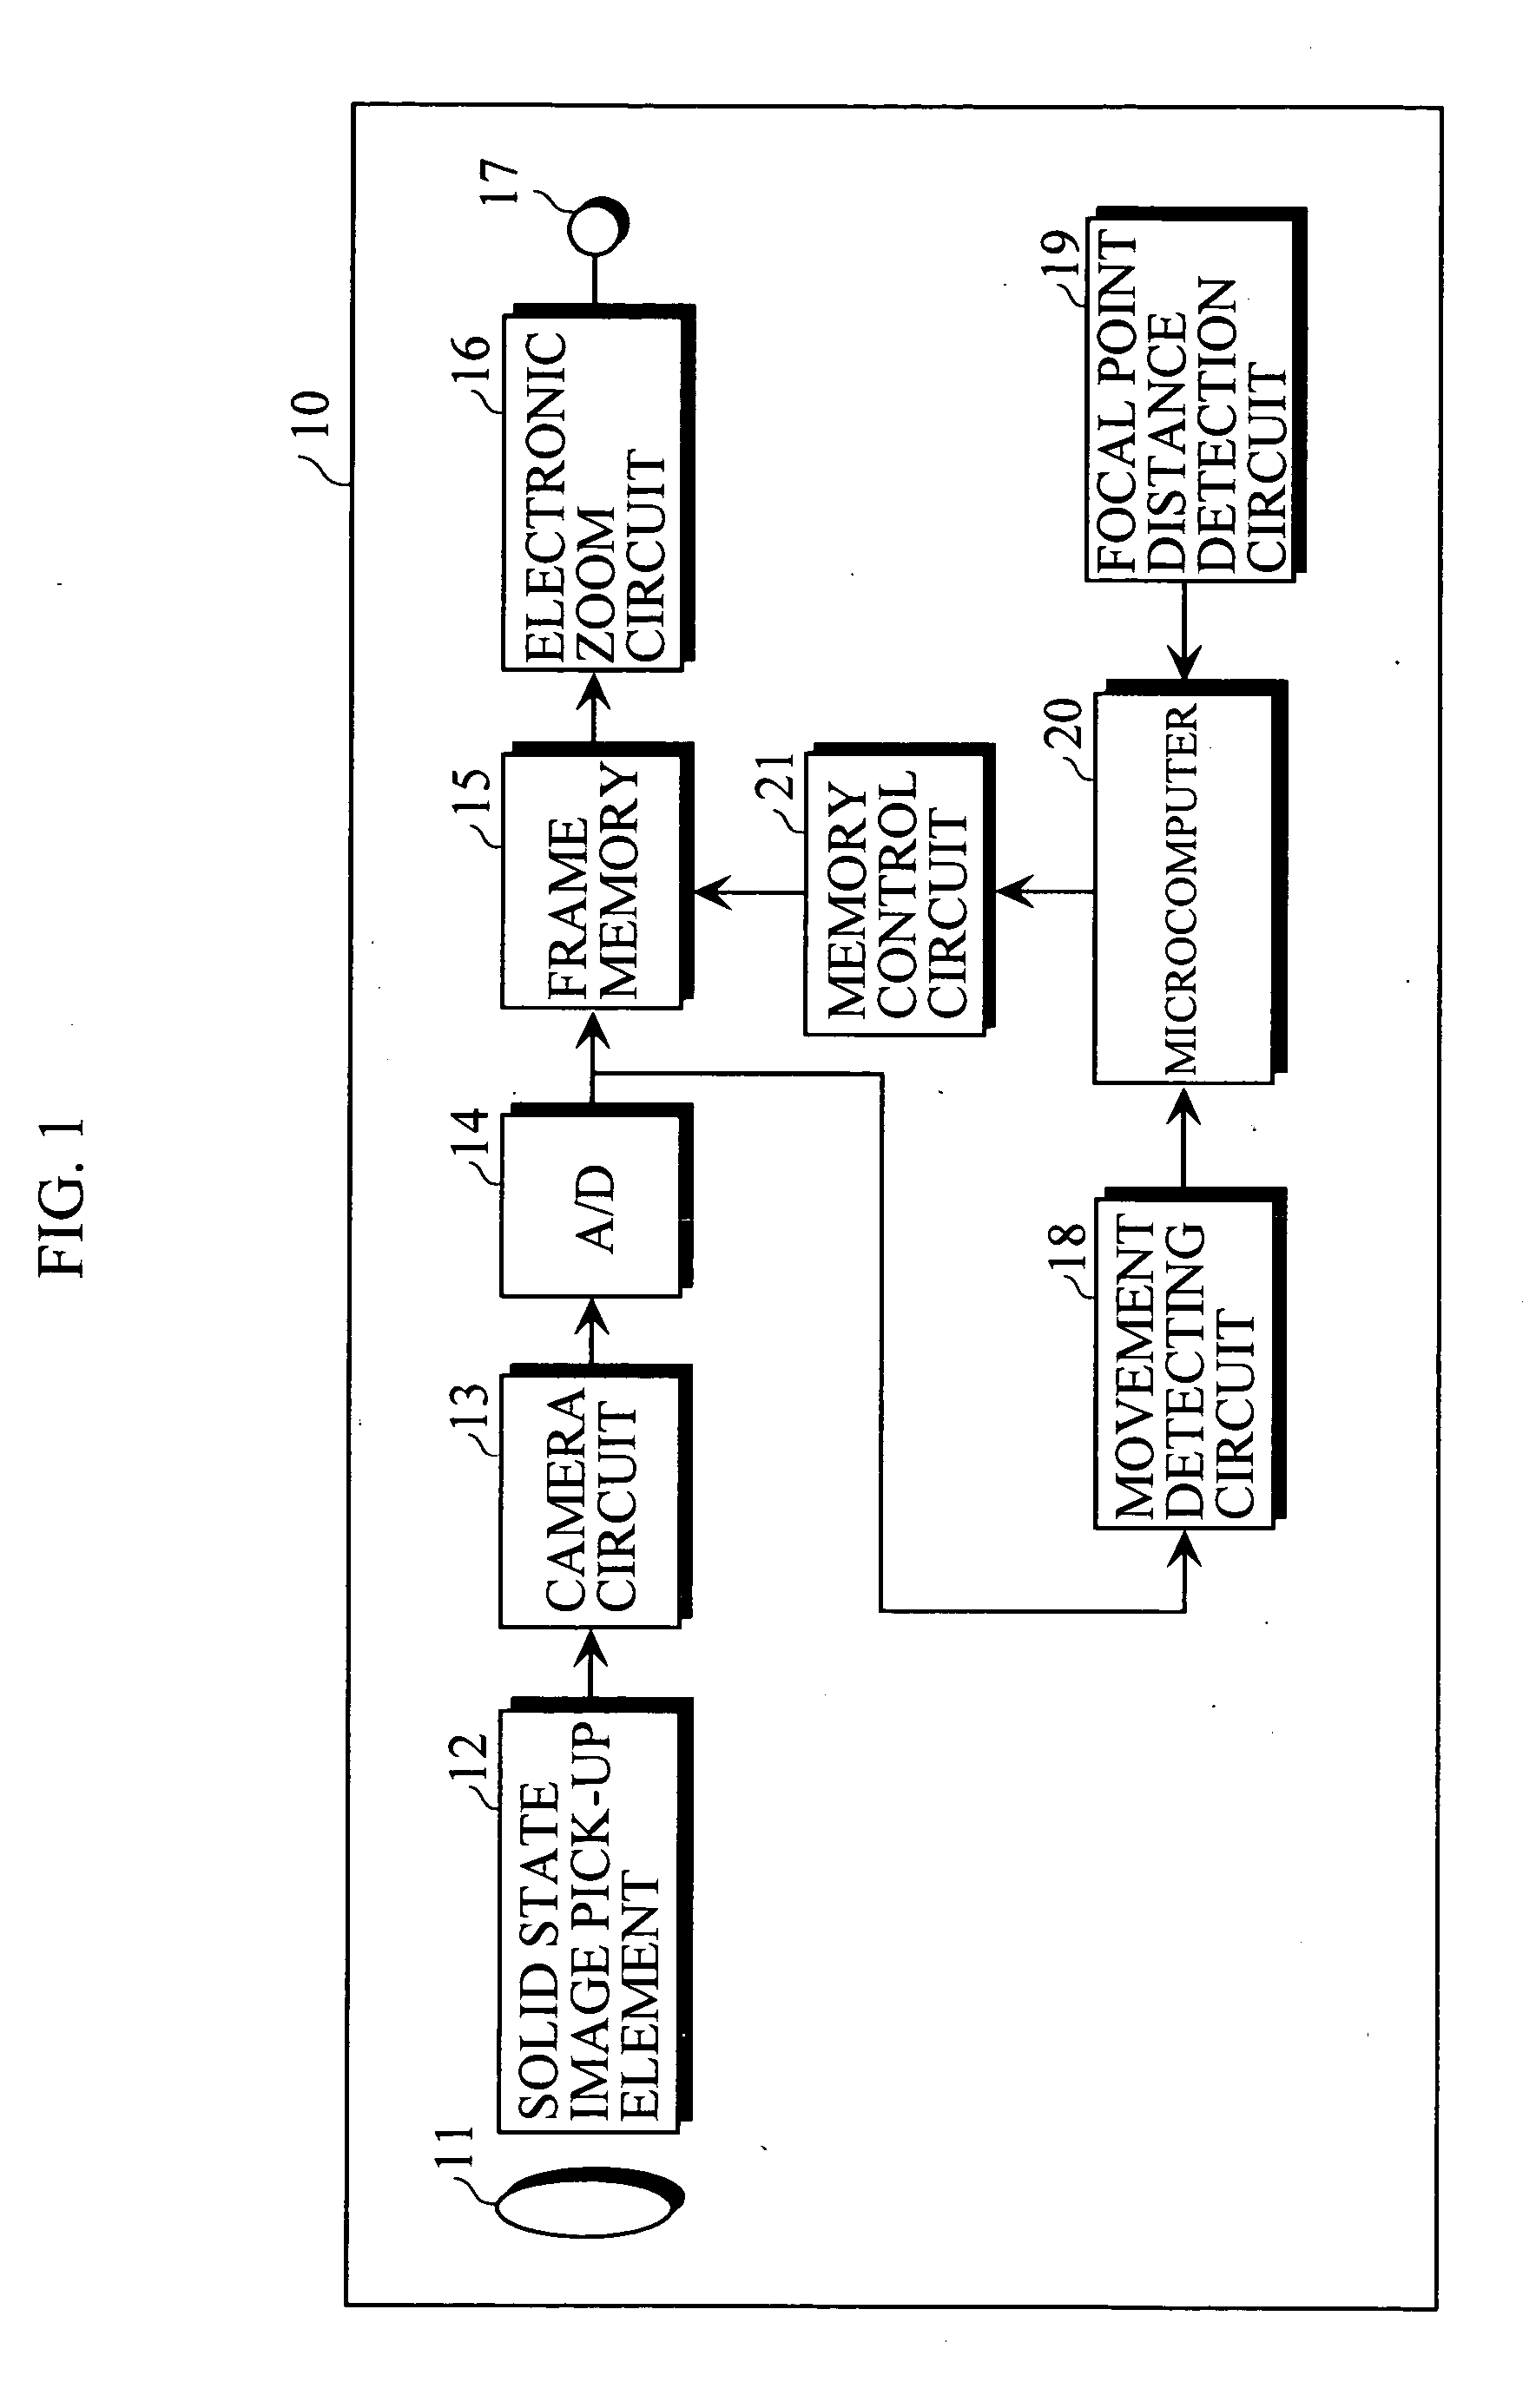 Unintentional hand movement canceling device and imaging apparatus